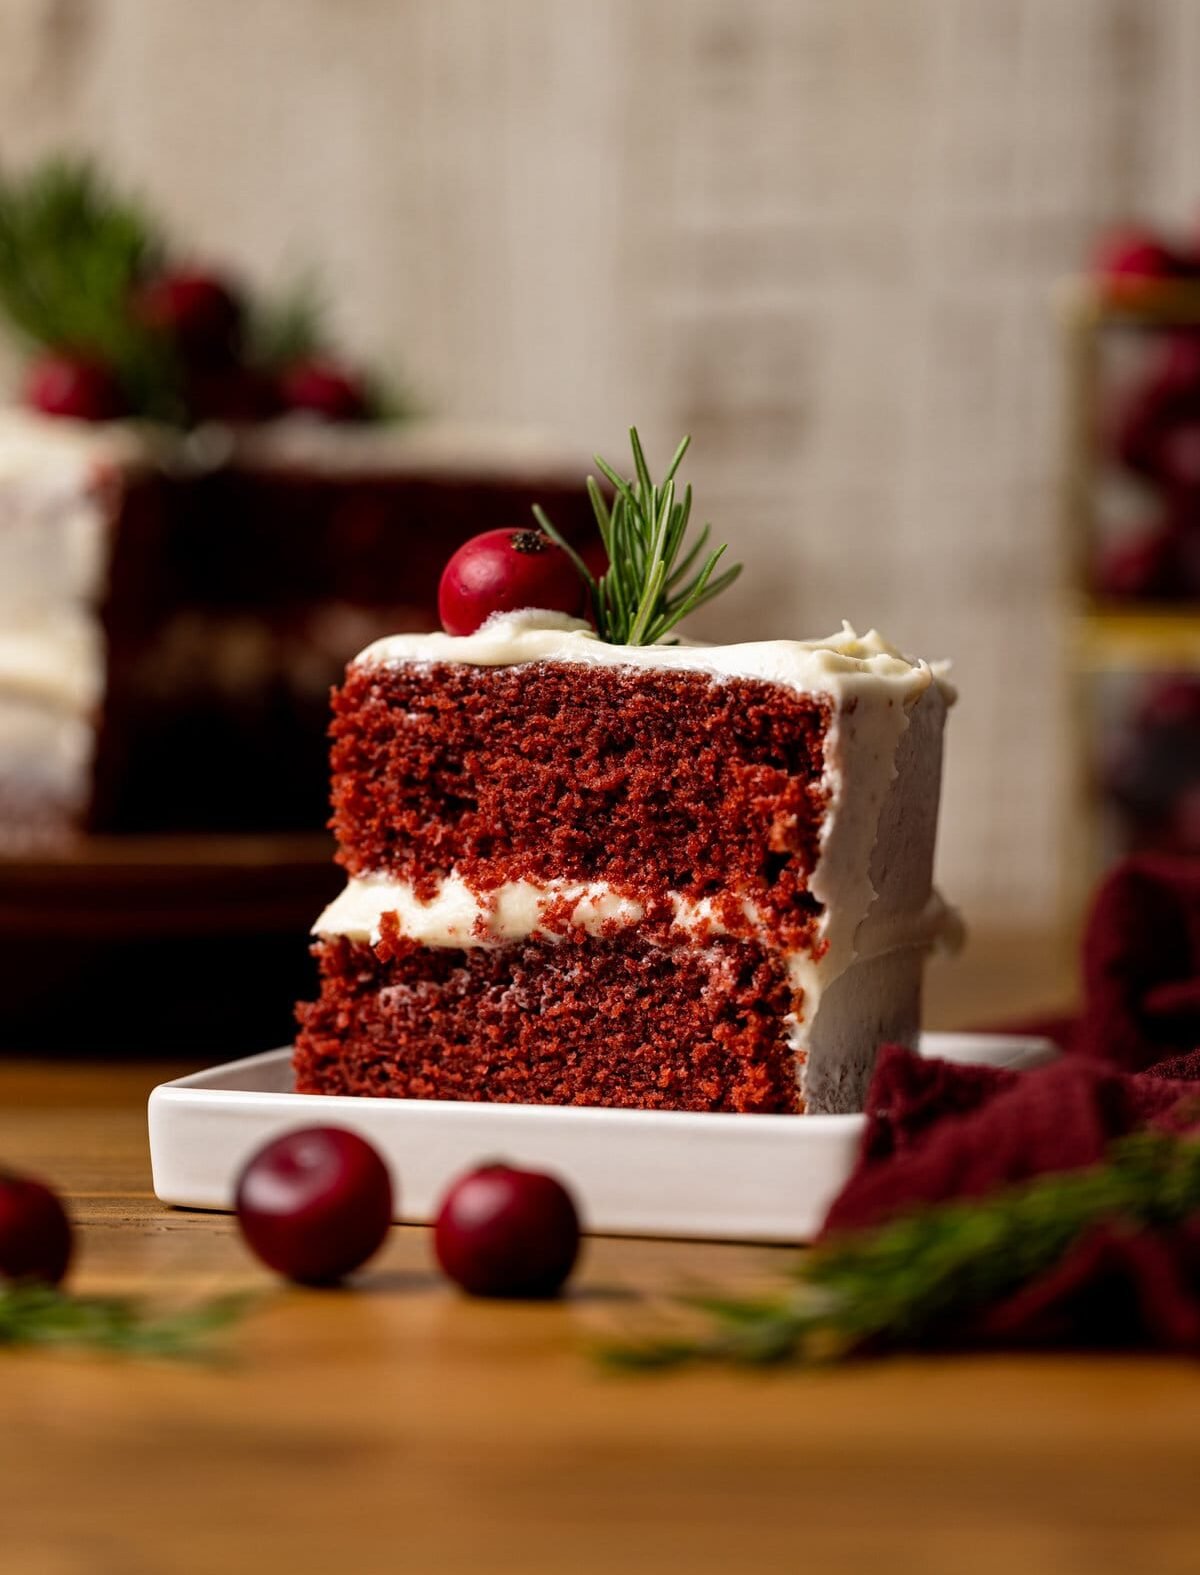 Slice of Red Velvet Cake with Cream Cheese Frosting